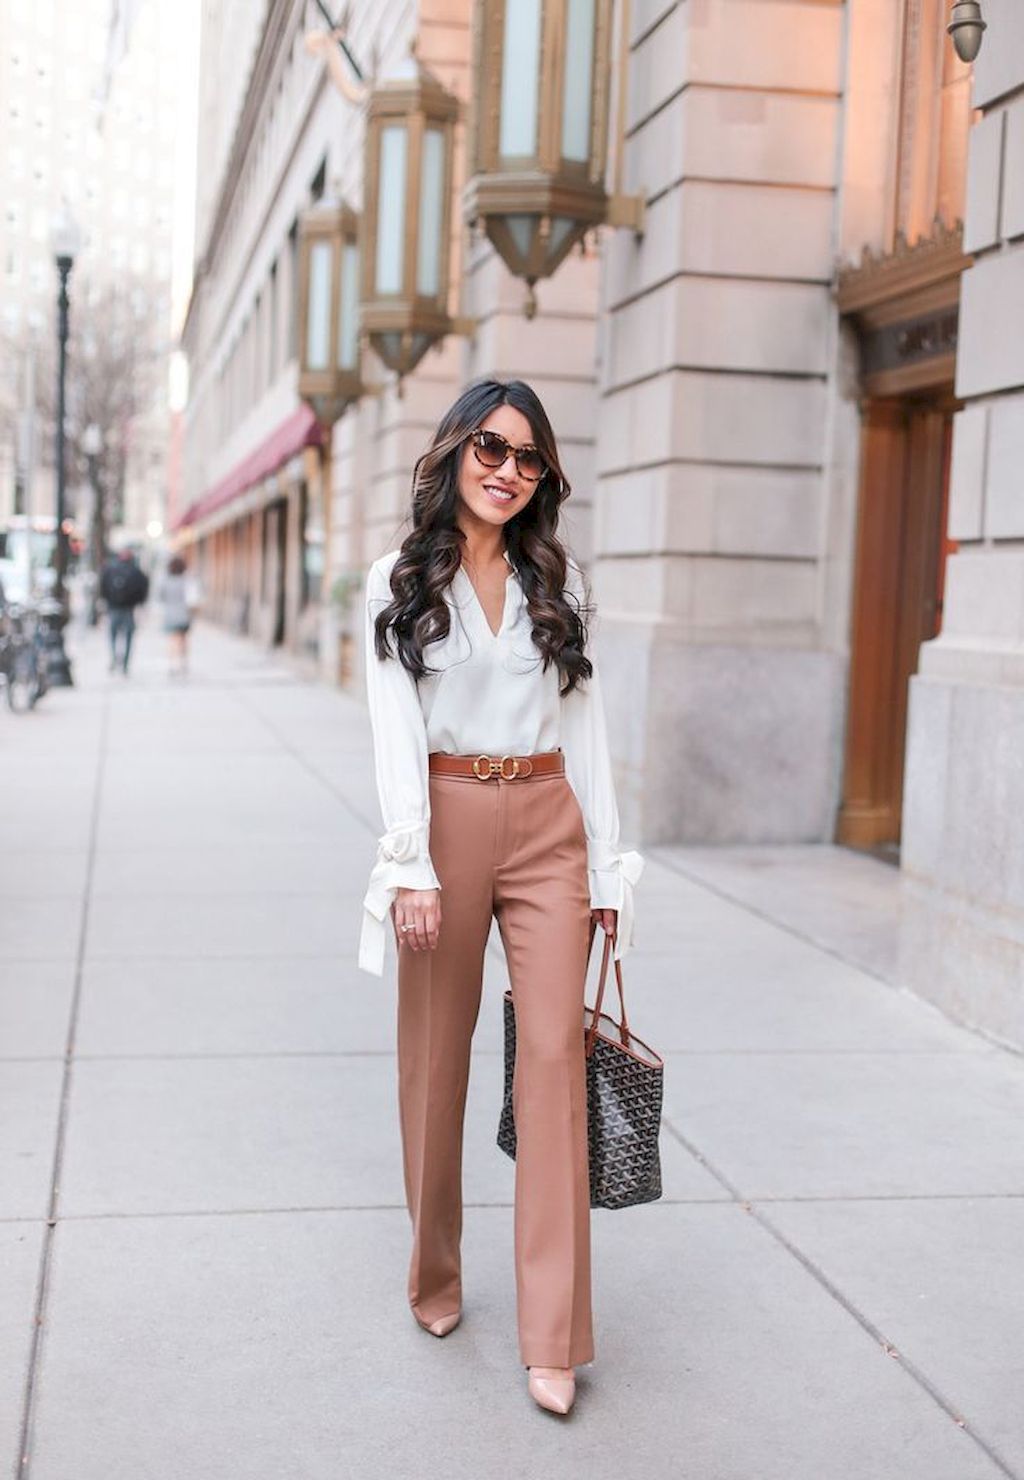 30 Best Business Casual Outfit Ideas for Women